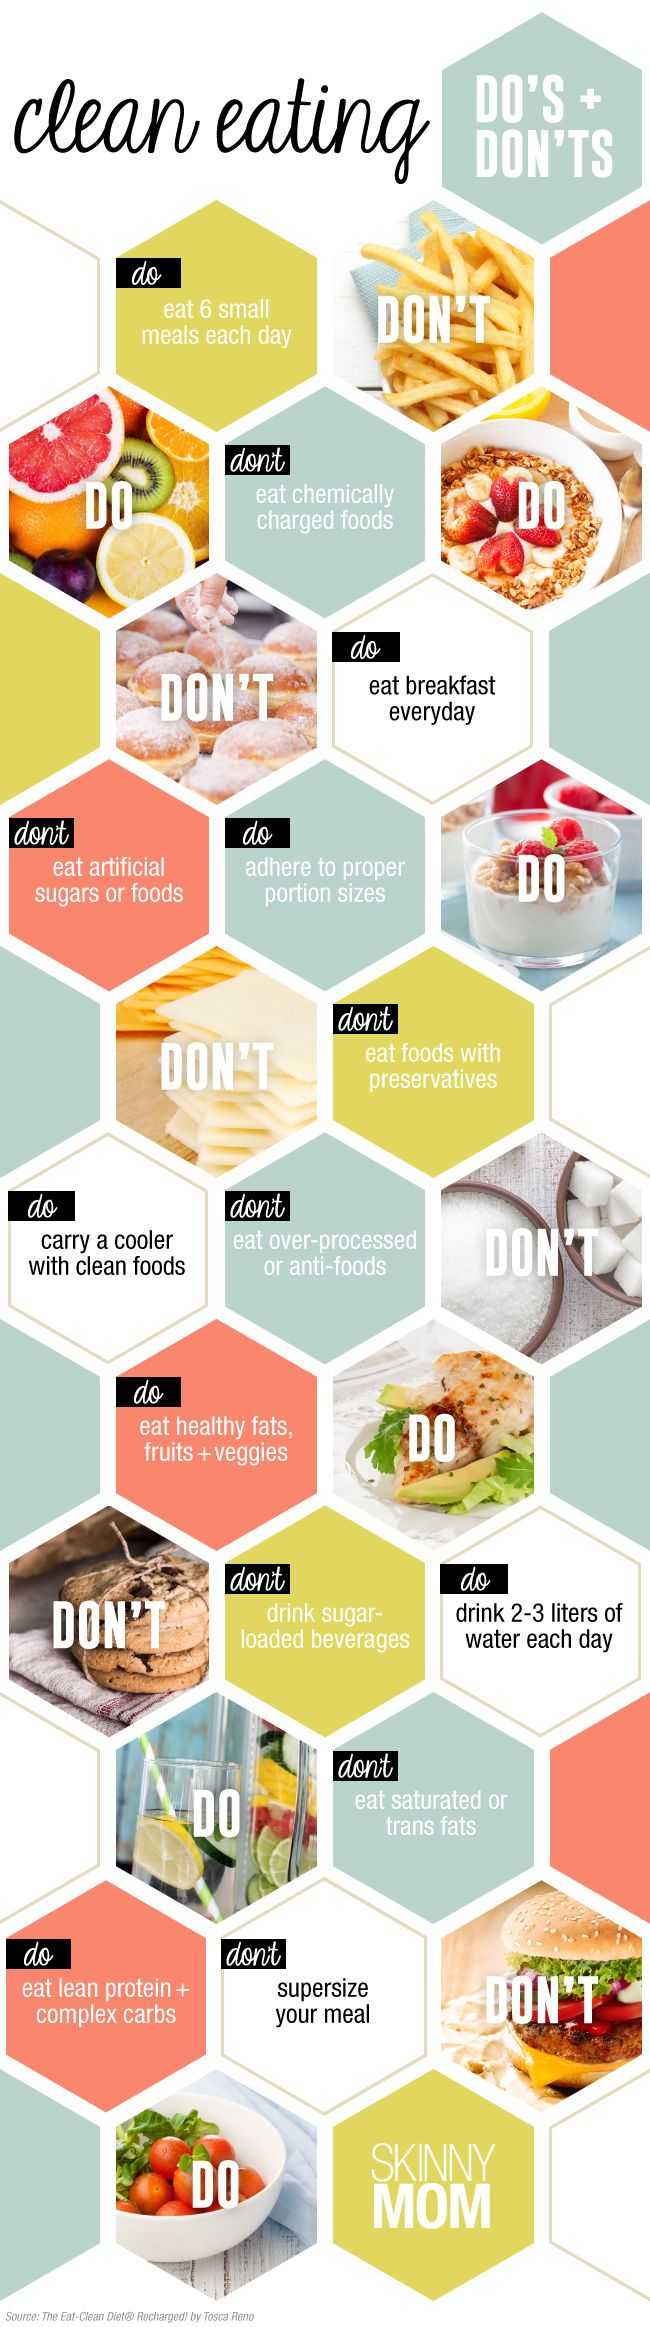 Clean Eating Do's & Don'ts